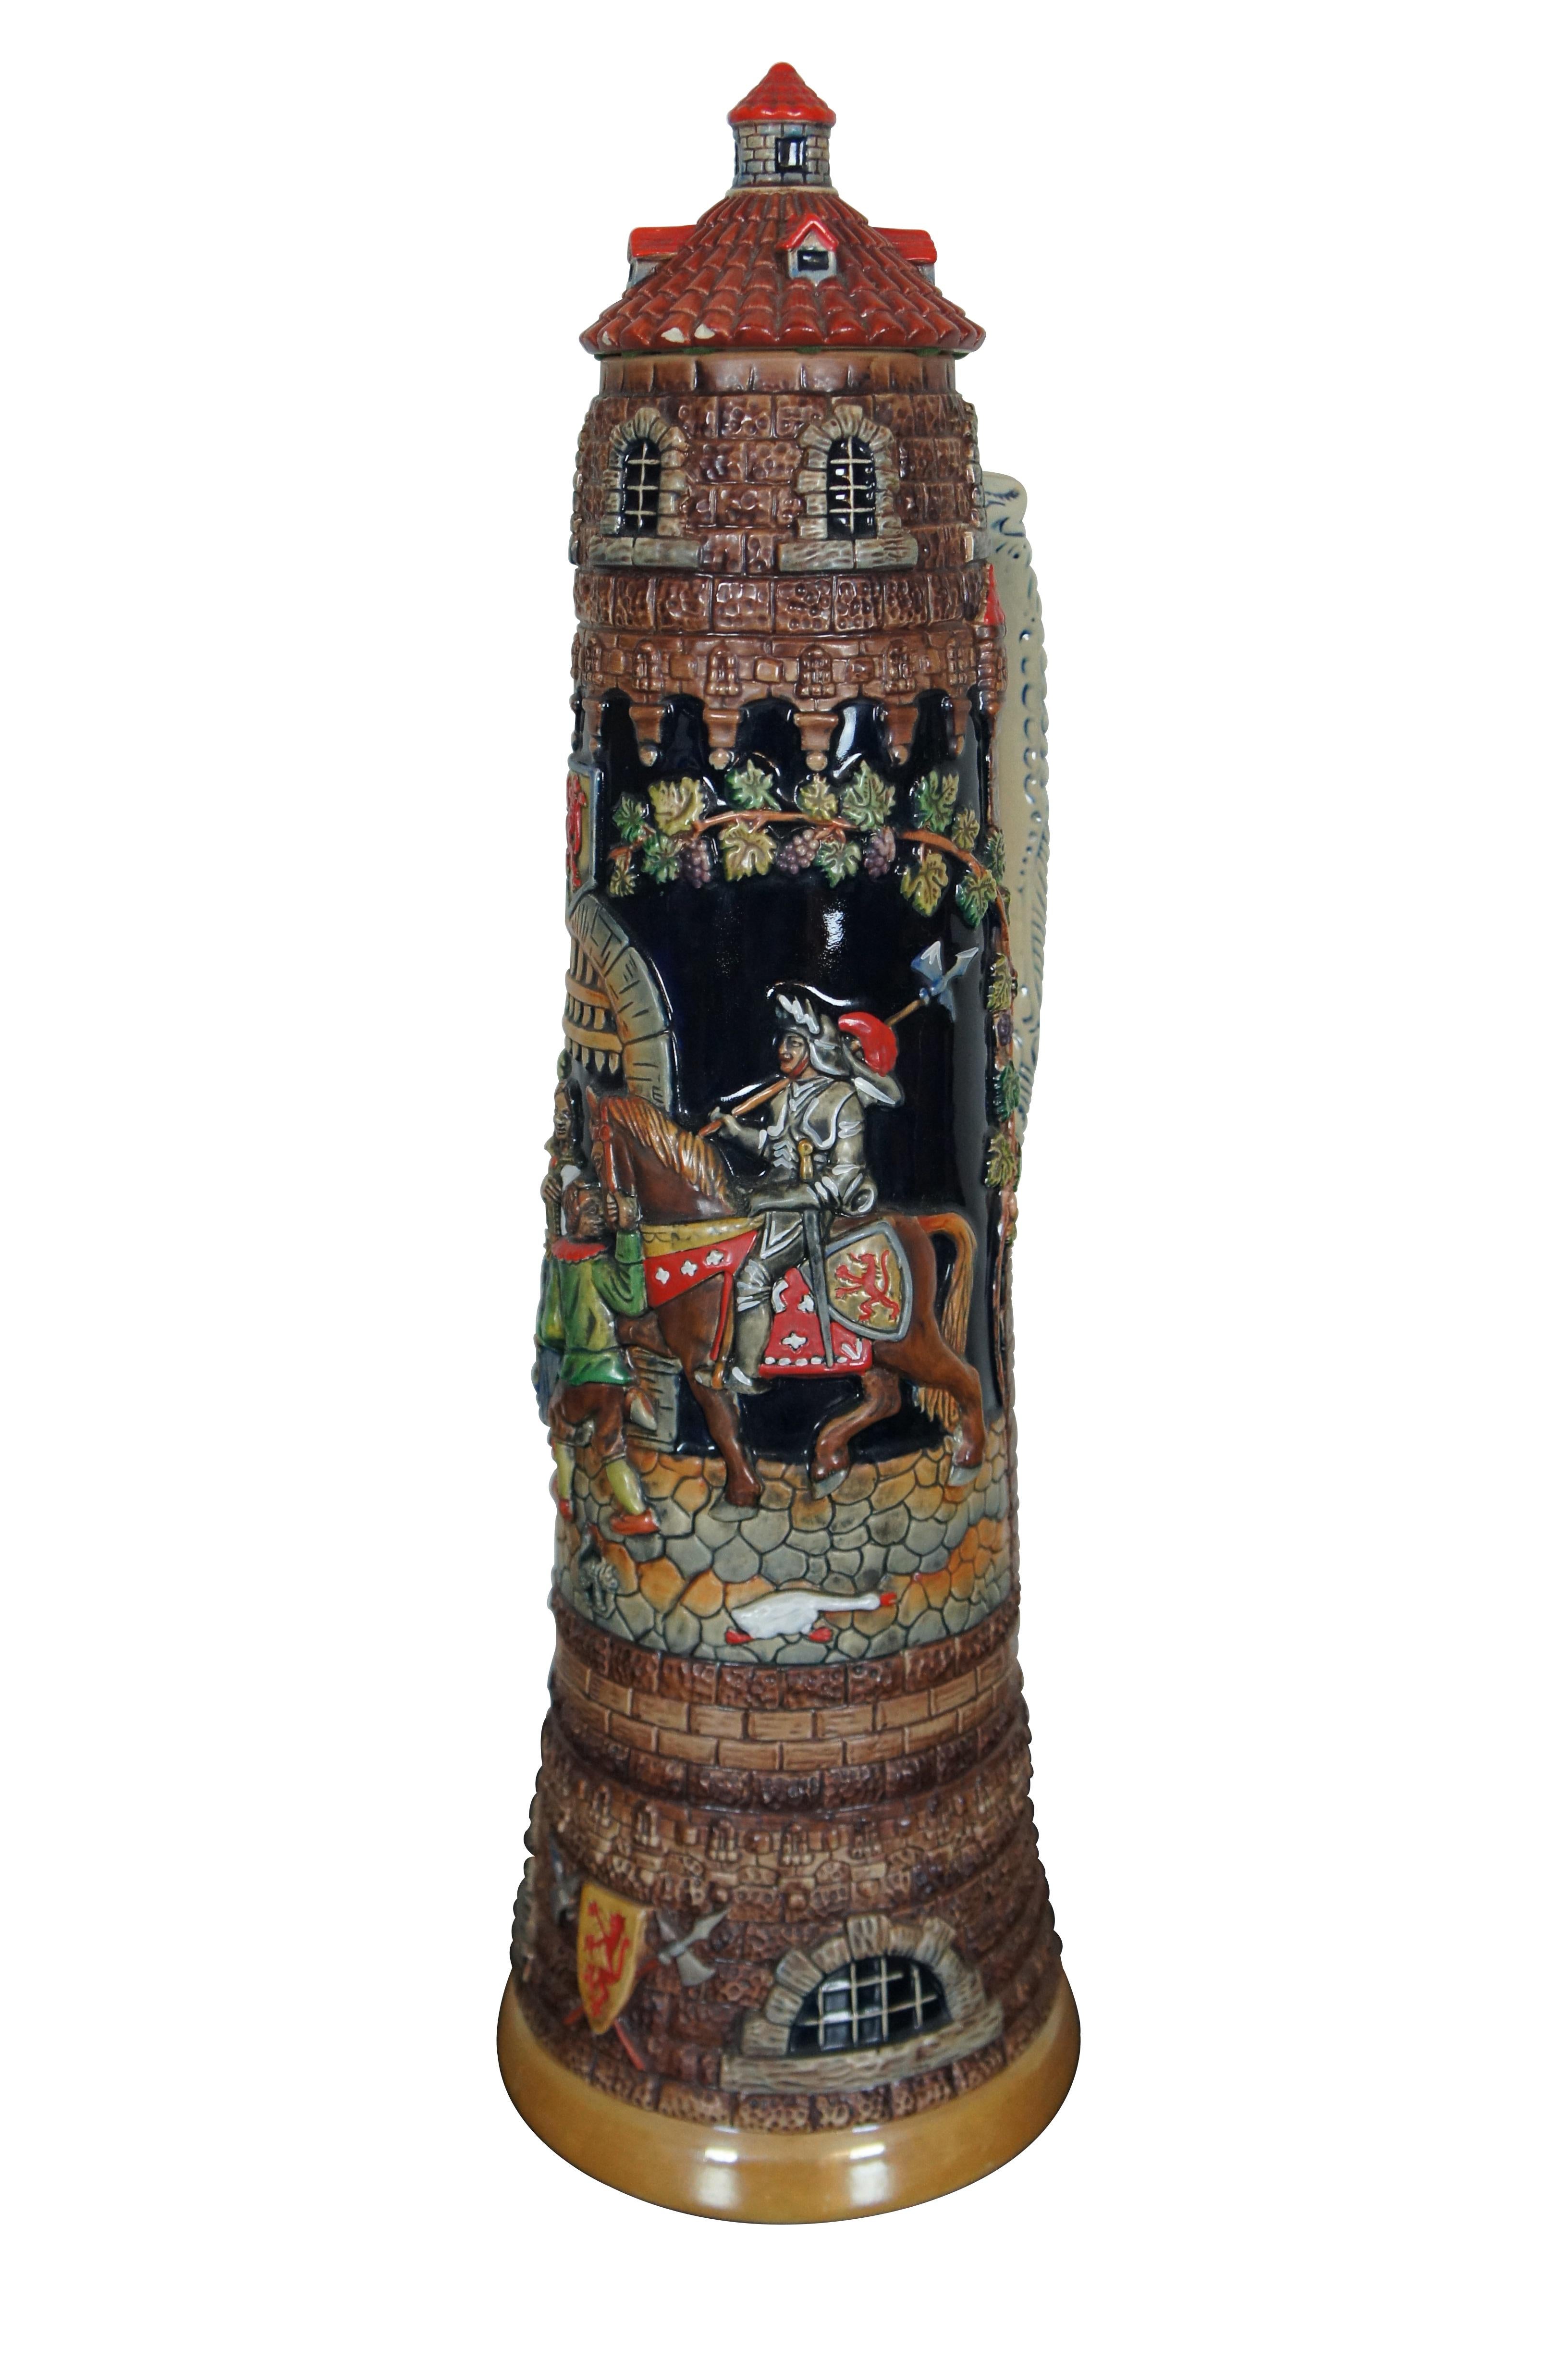 Oversized German Werner Corzelius five liter beer stein, lidded mug or tankard featuring a middle age castle theme with a knight or soldier riding horse on cobblestones through the tower gates, being greeted by a group of people and some wild